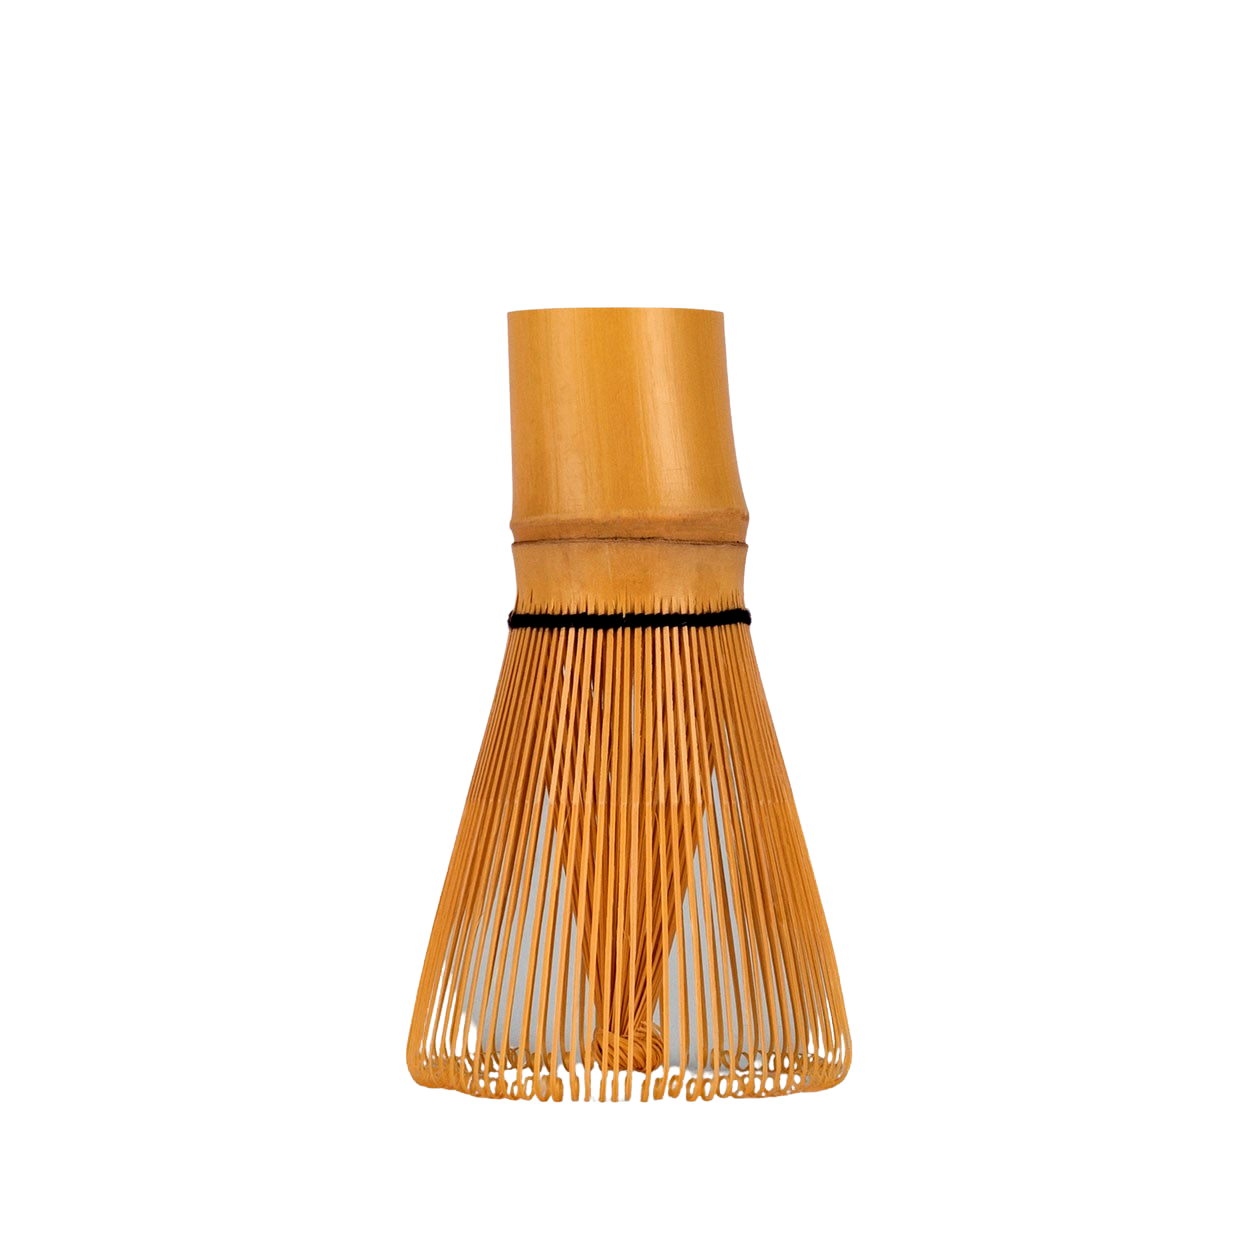 Renée Voltaire Matcha Whisk Bamboo